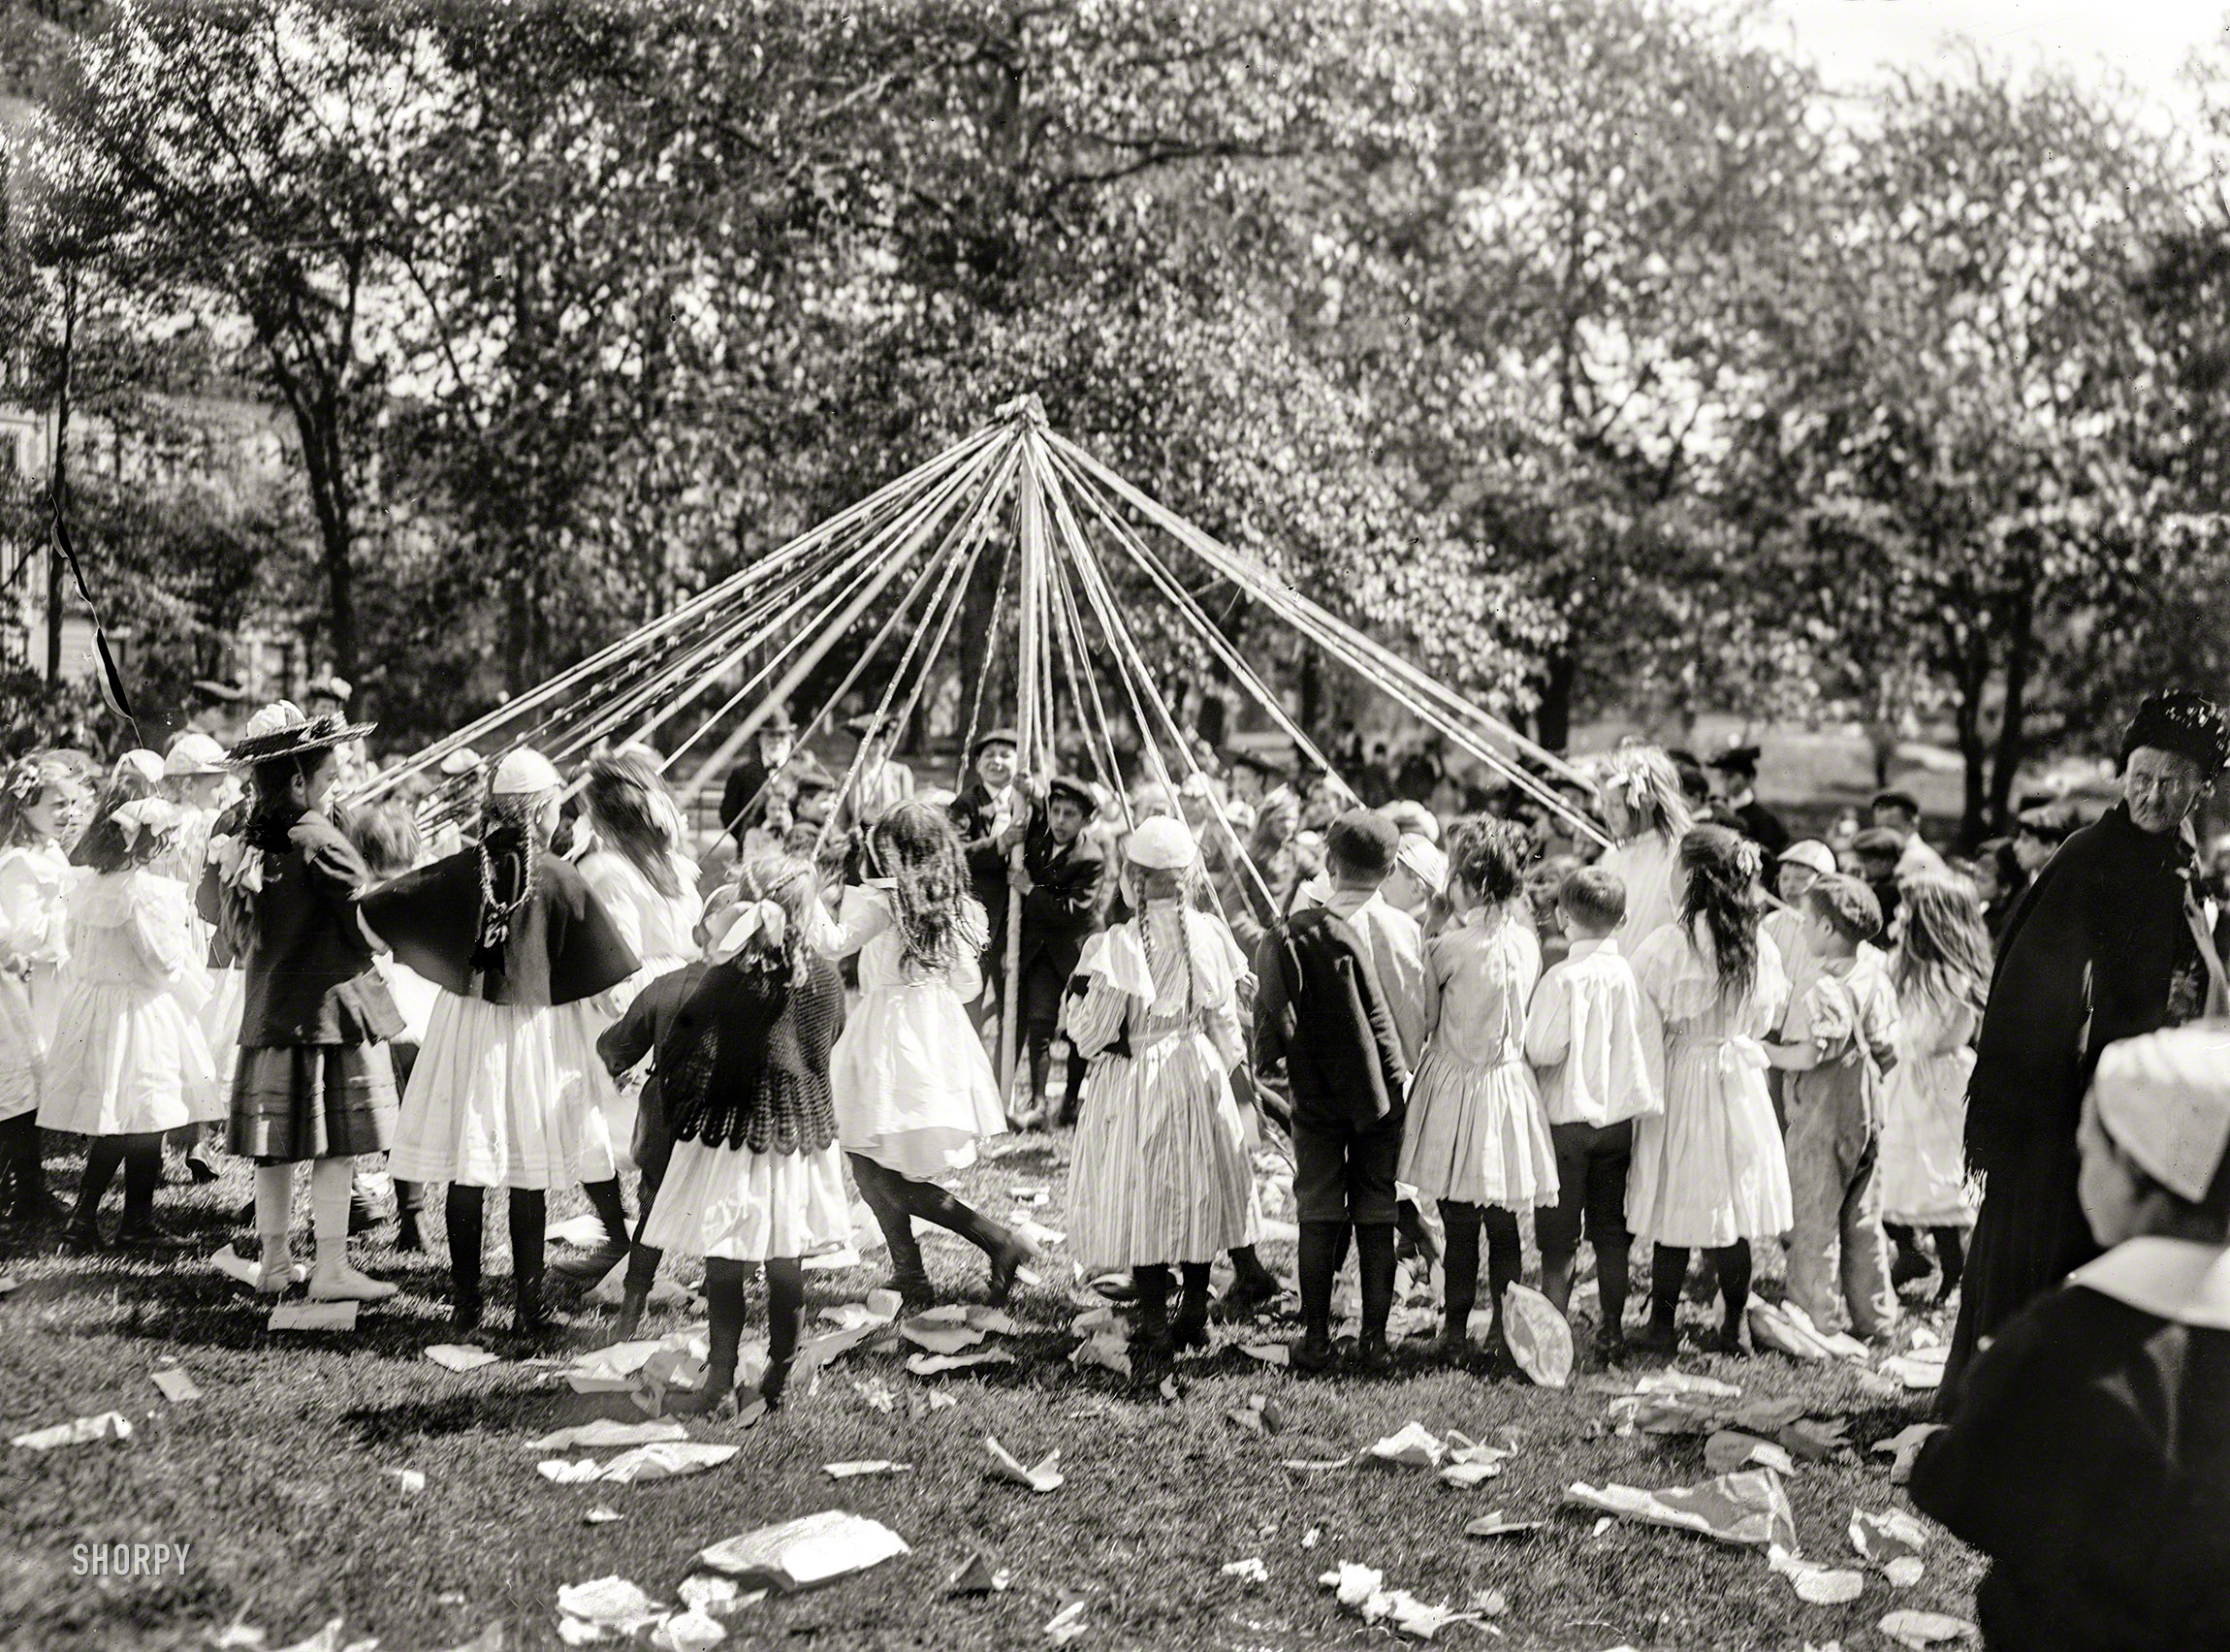 Circa 1905. "Children's Day May pole dance, Central Park, New York." 8x6 inch dry plate glass negative, Detroit Publishing Company. View full size.